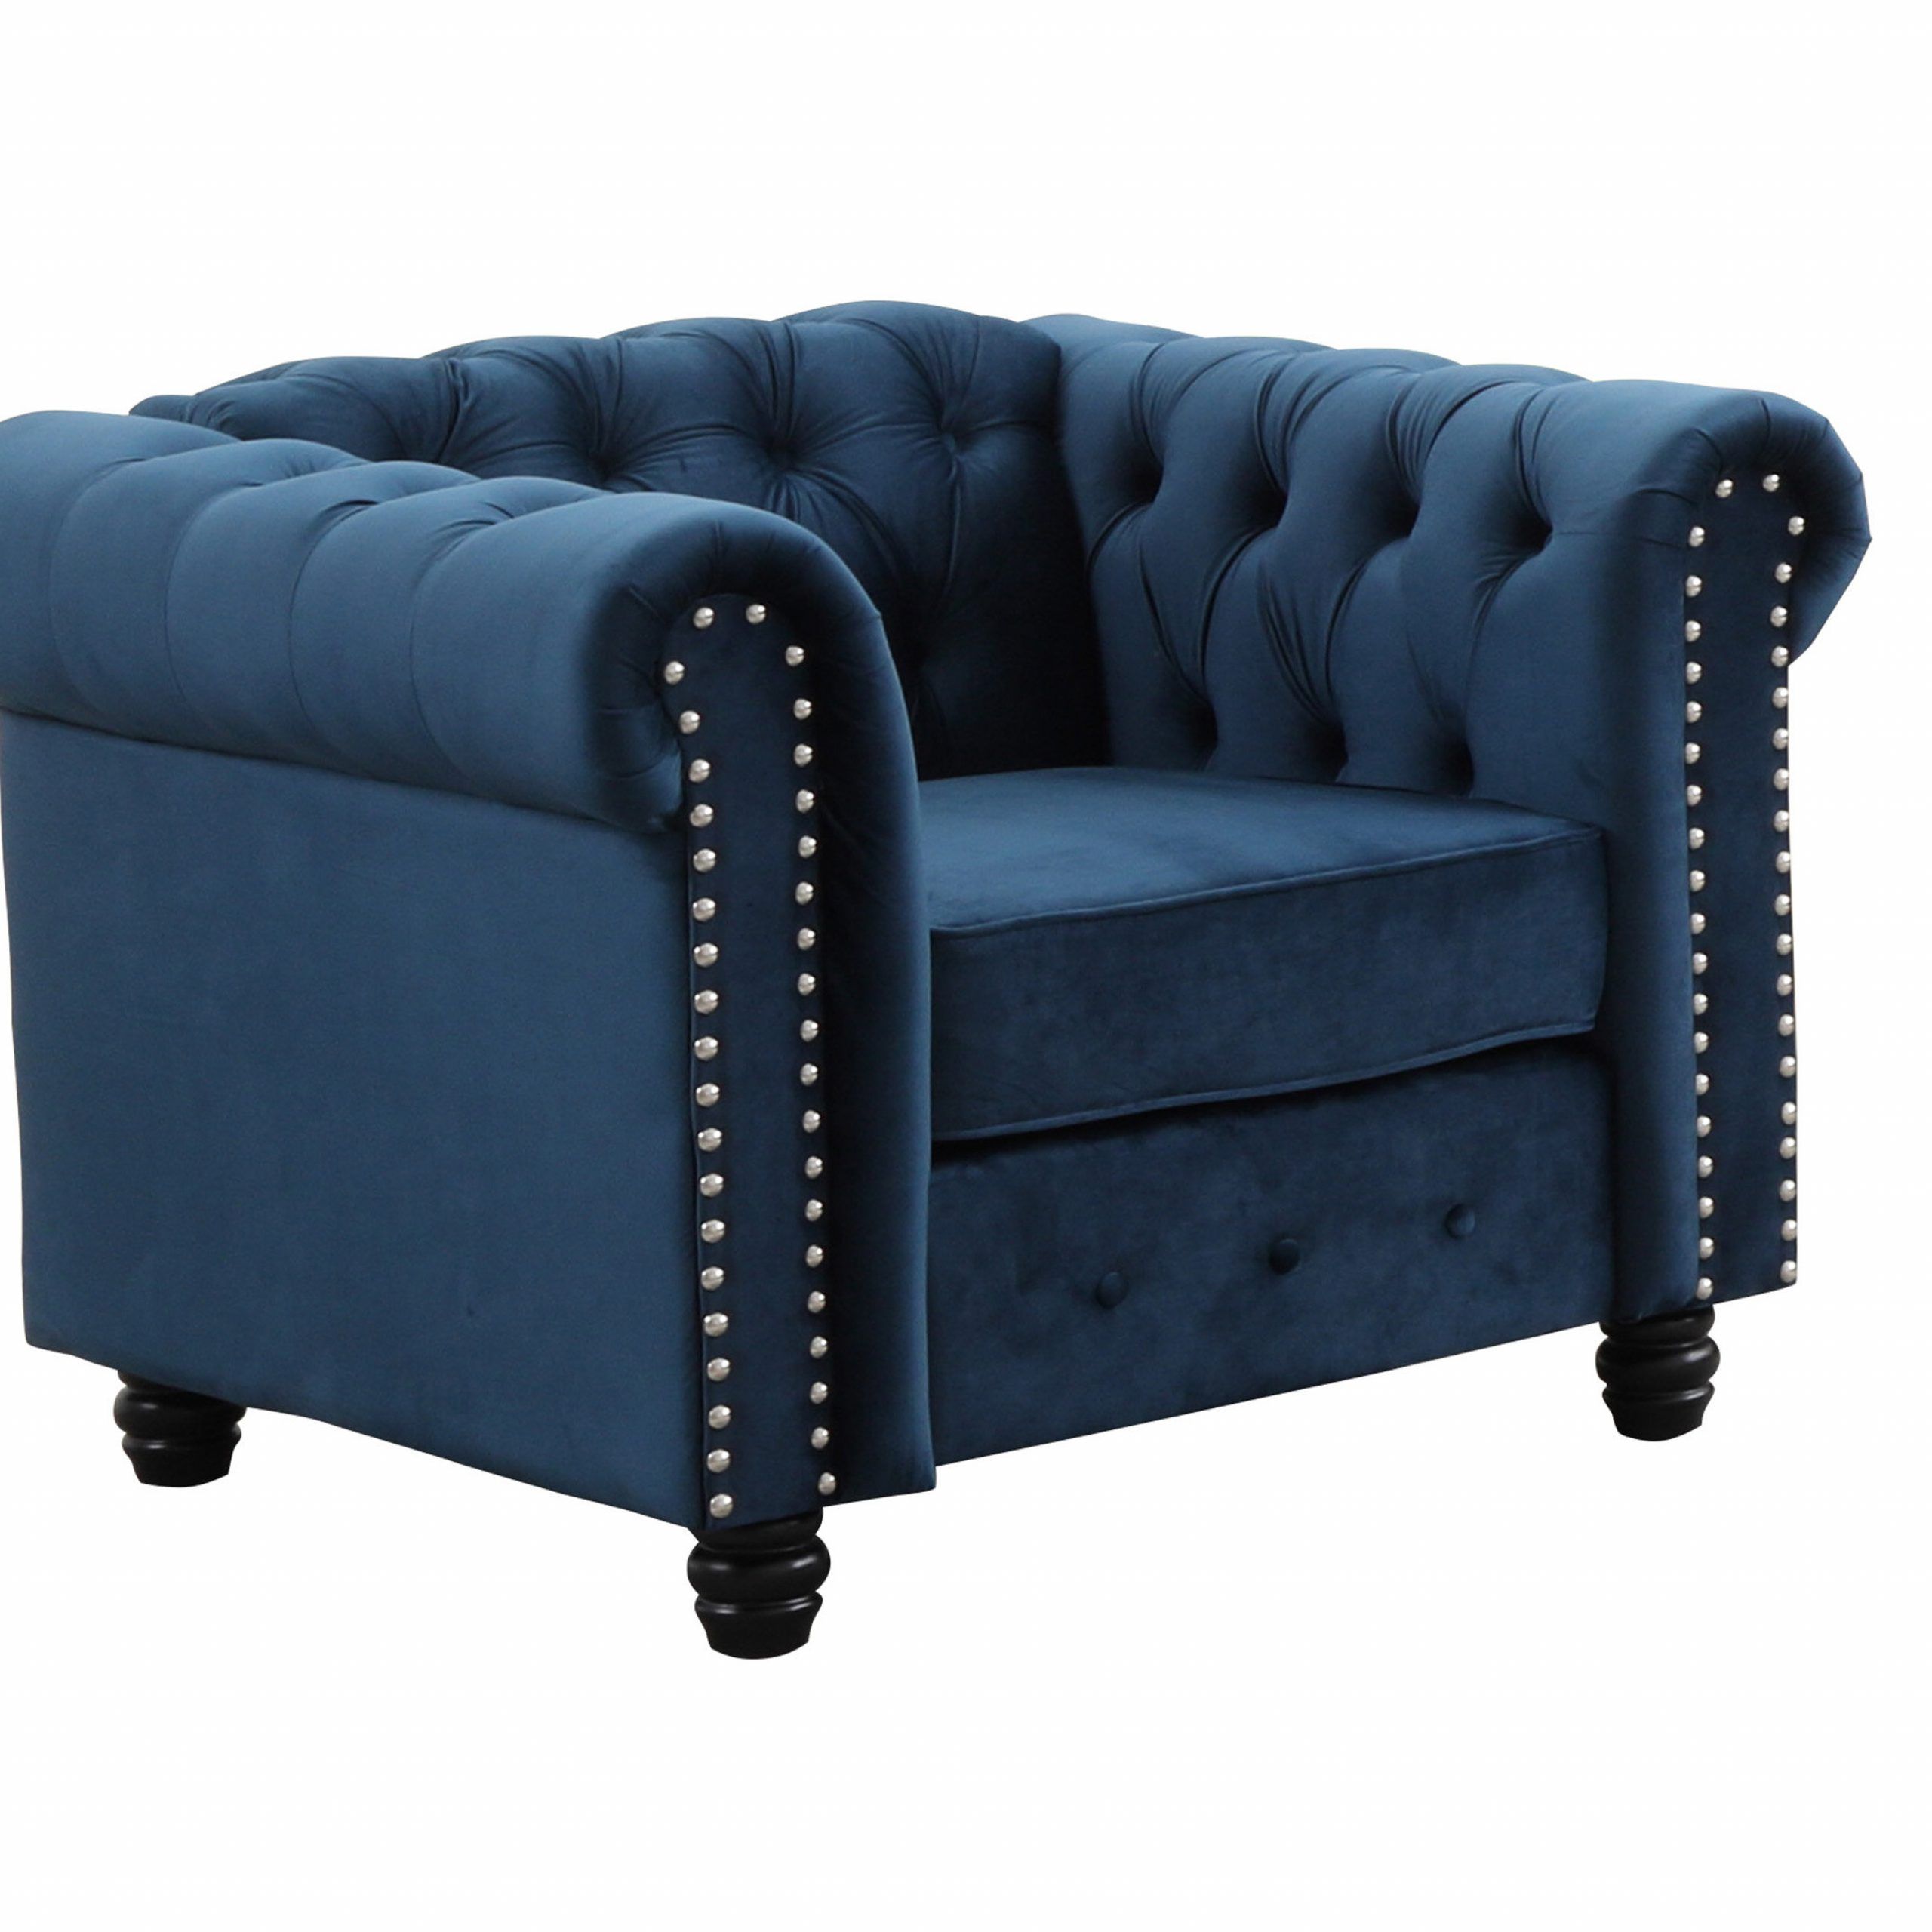 Galesville Tufted Polyester Wingback Chairs Inside Well Liked Ys001 35'' W Tufted Velvet Armchair (View 12 of 20)